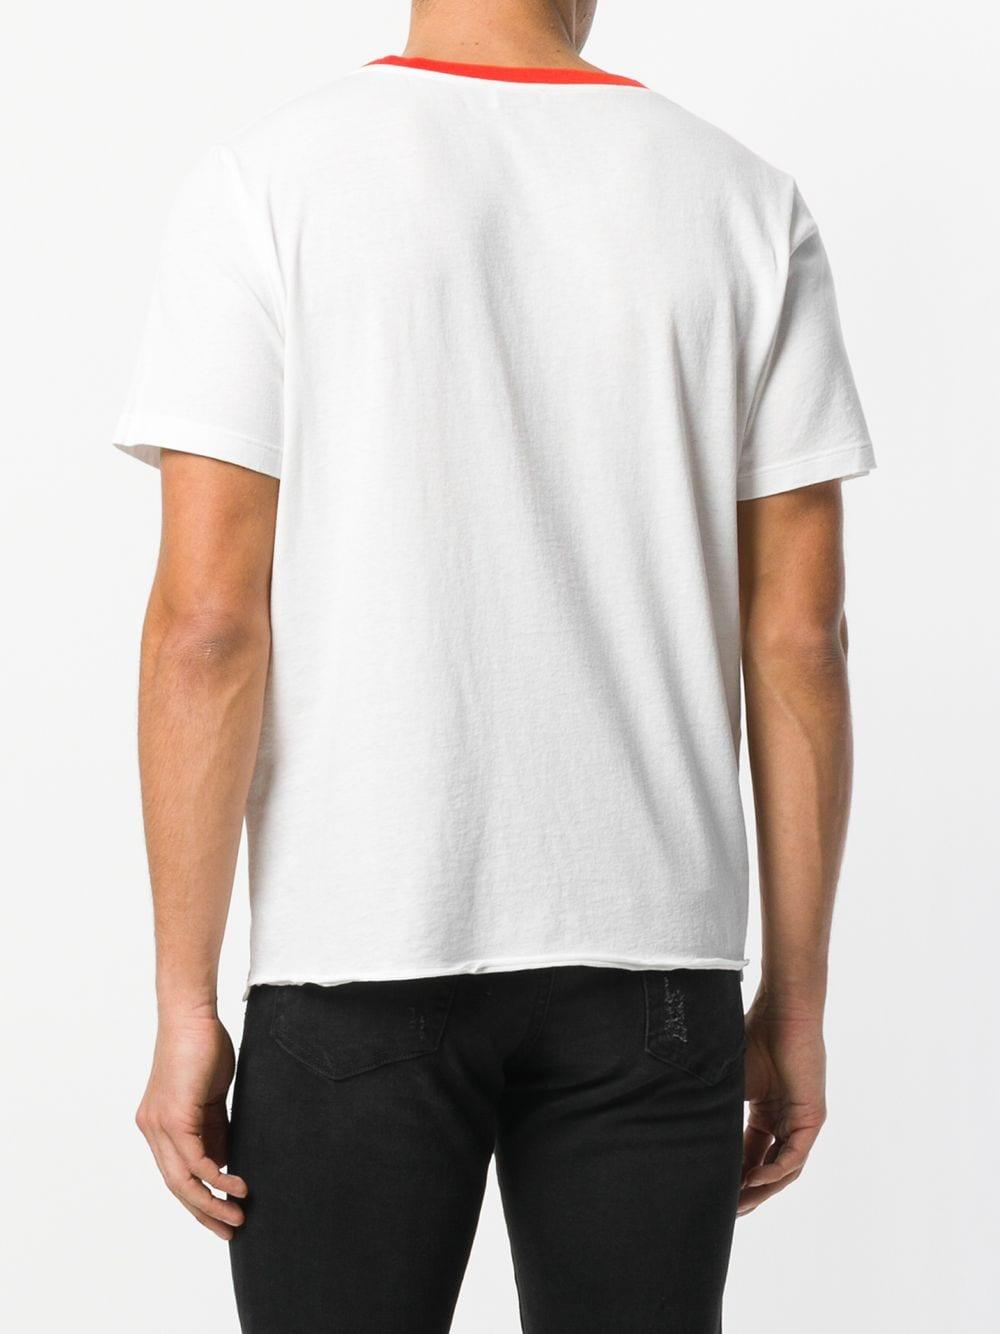 Saint Laurent Cotton Waiting For Sunset T-shirt in White/Red 